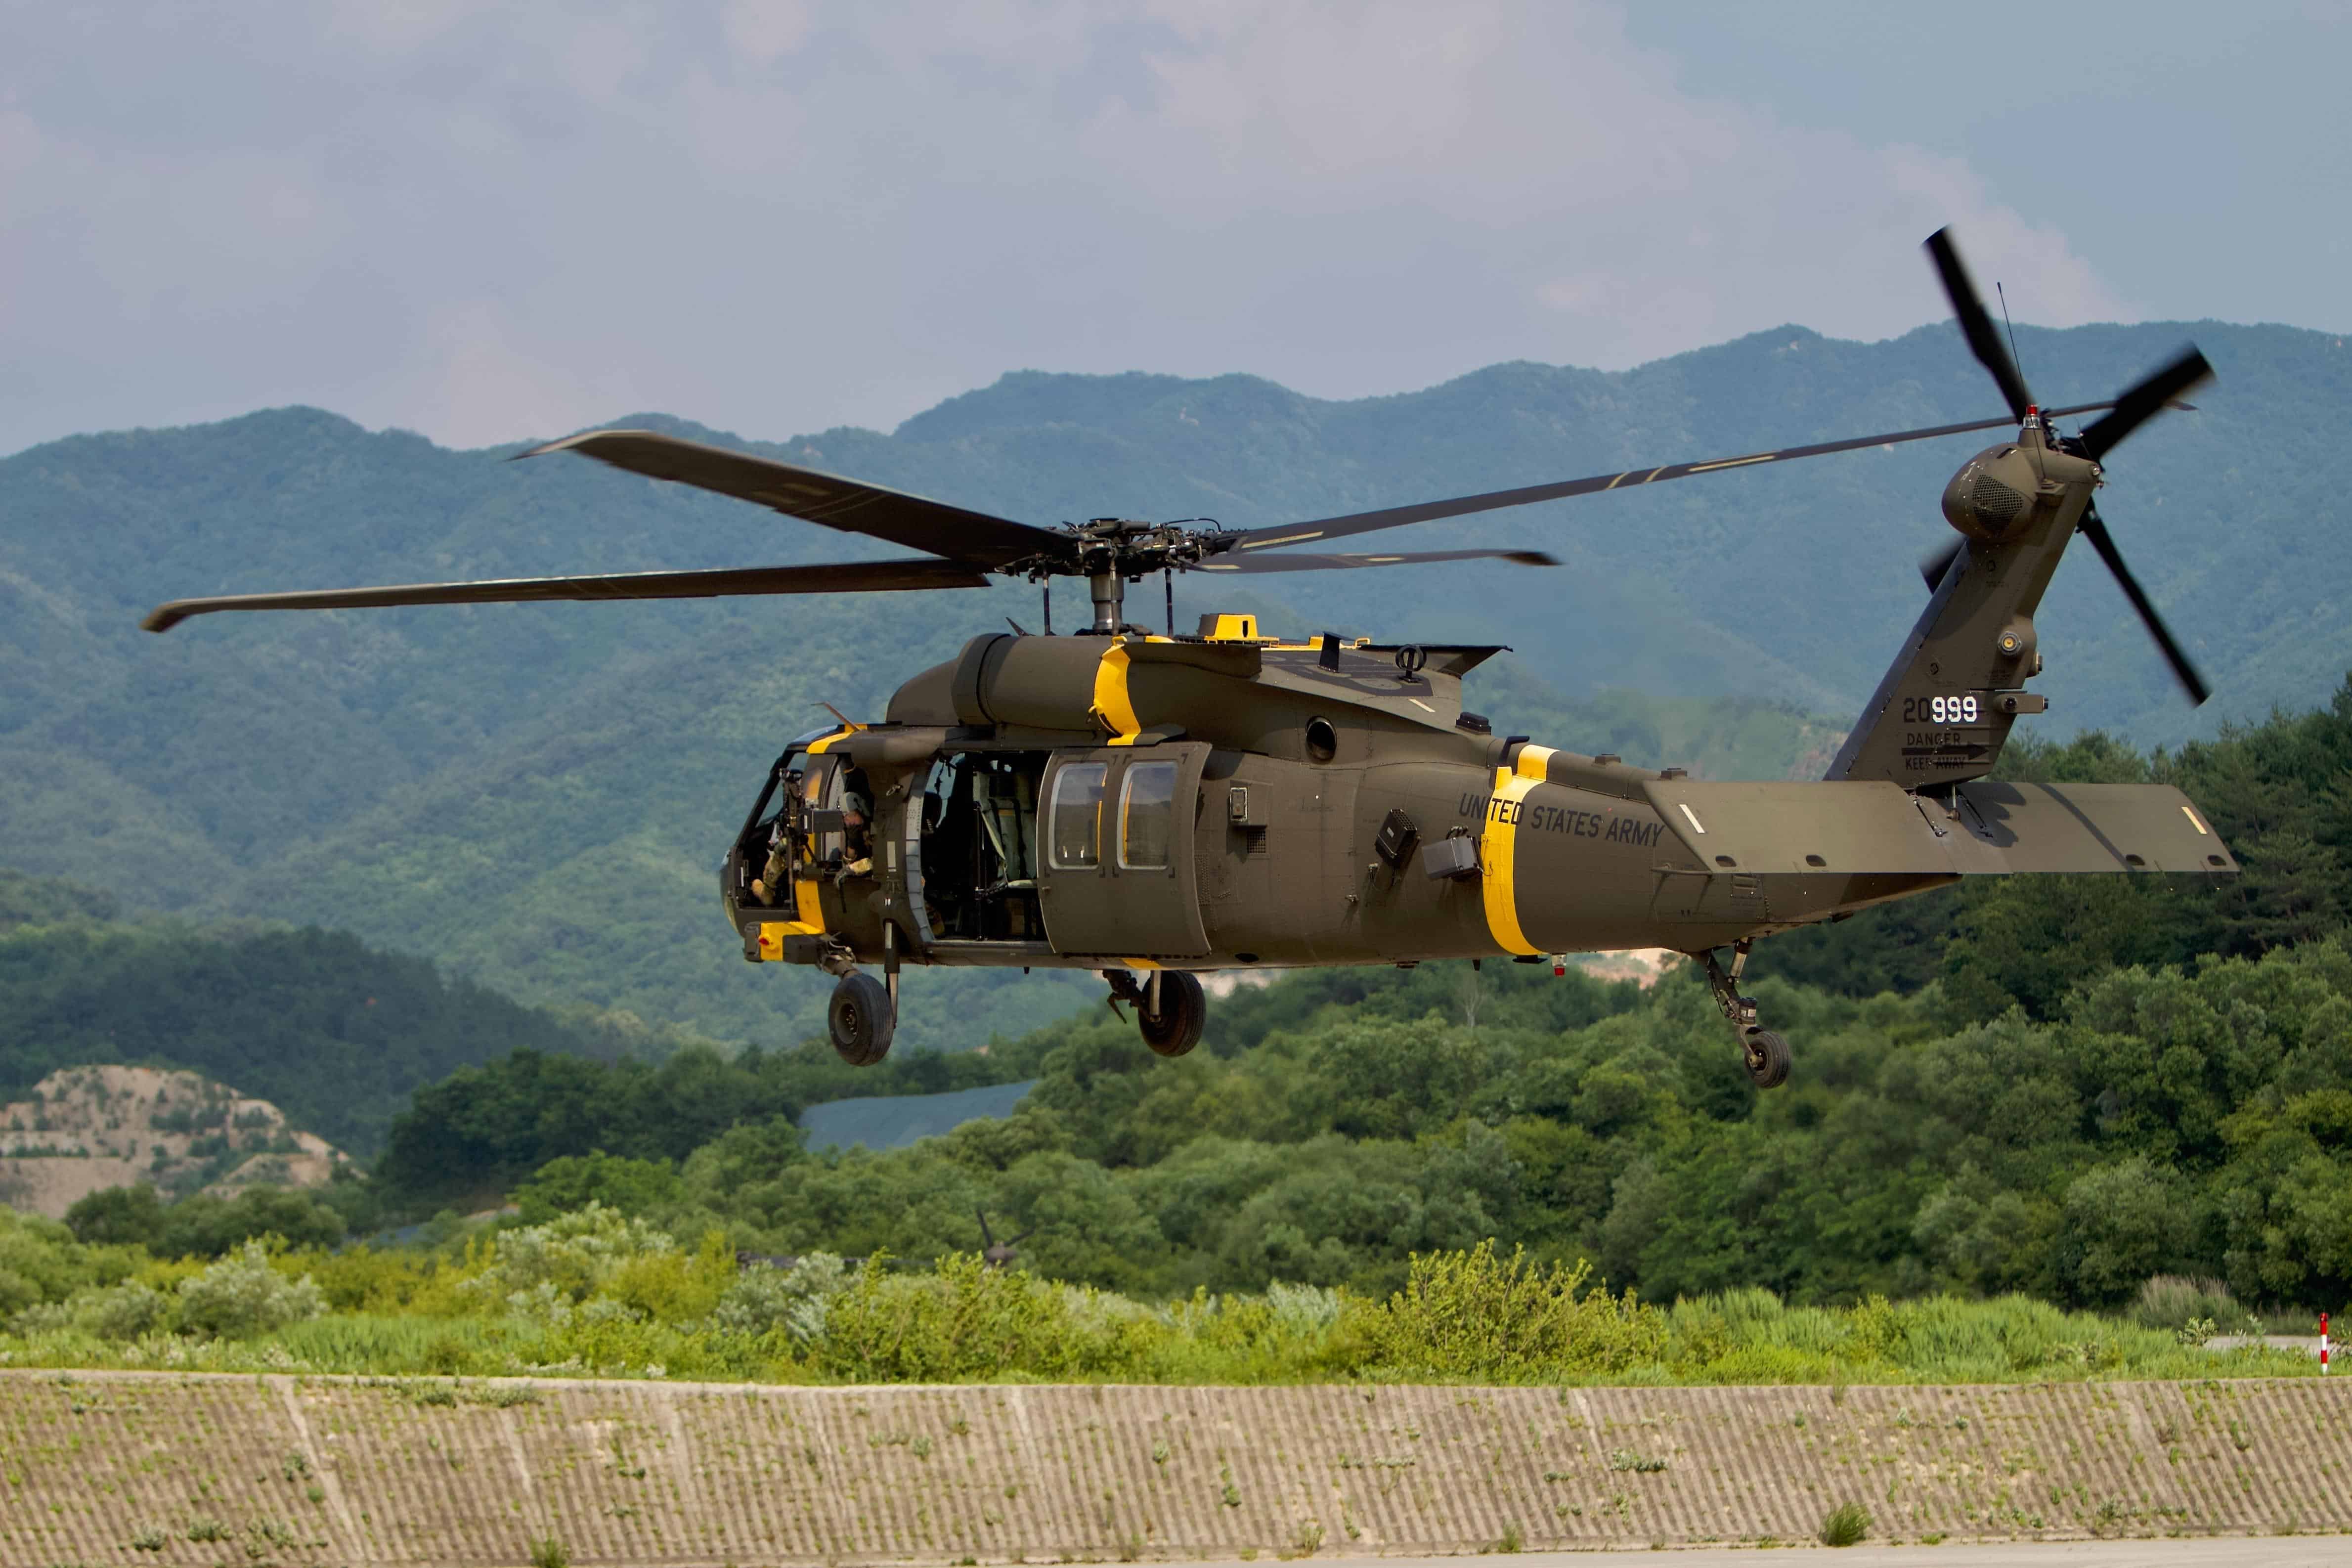 U.S. Army Soldiers from 2nd Battalion, 2nd Aviation Regiment, 2nd Combat Aviation Brigade, 2nd Infantry Division/ROK-U.S. Combined Division participate in dual door gunnery in their semi-annual door gunnery training exercise from June 21 to 25, 2022. A UH-60M Black Hawk helicopter takes off after refueling to continue day time table VI aerial gunnery.